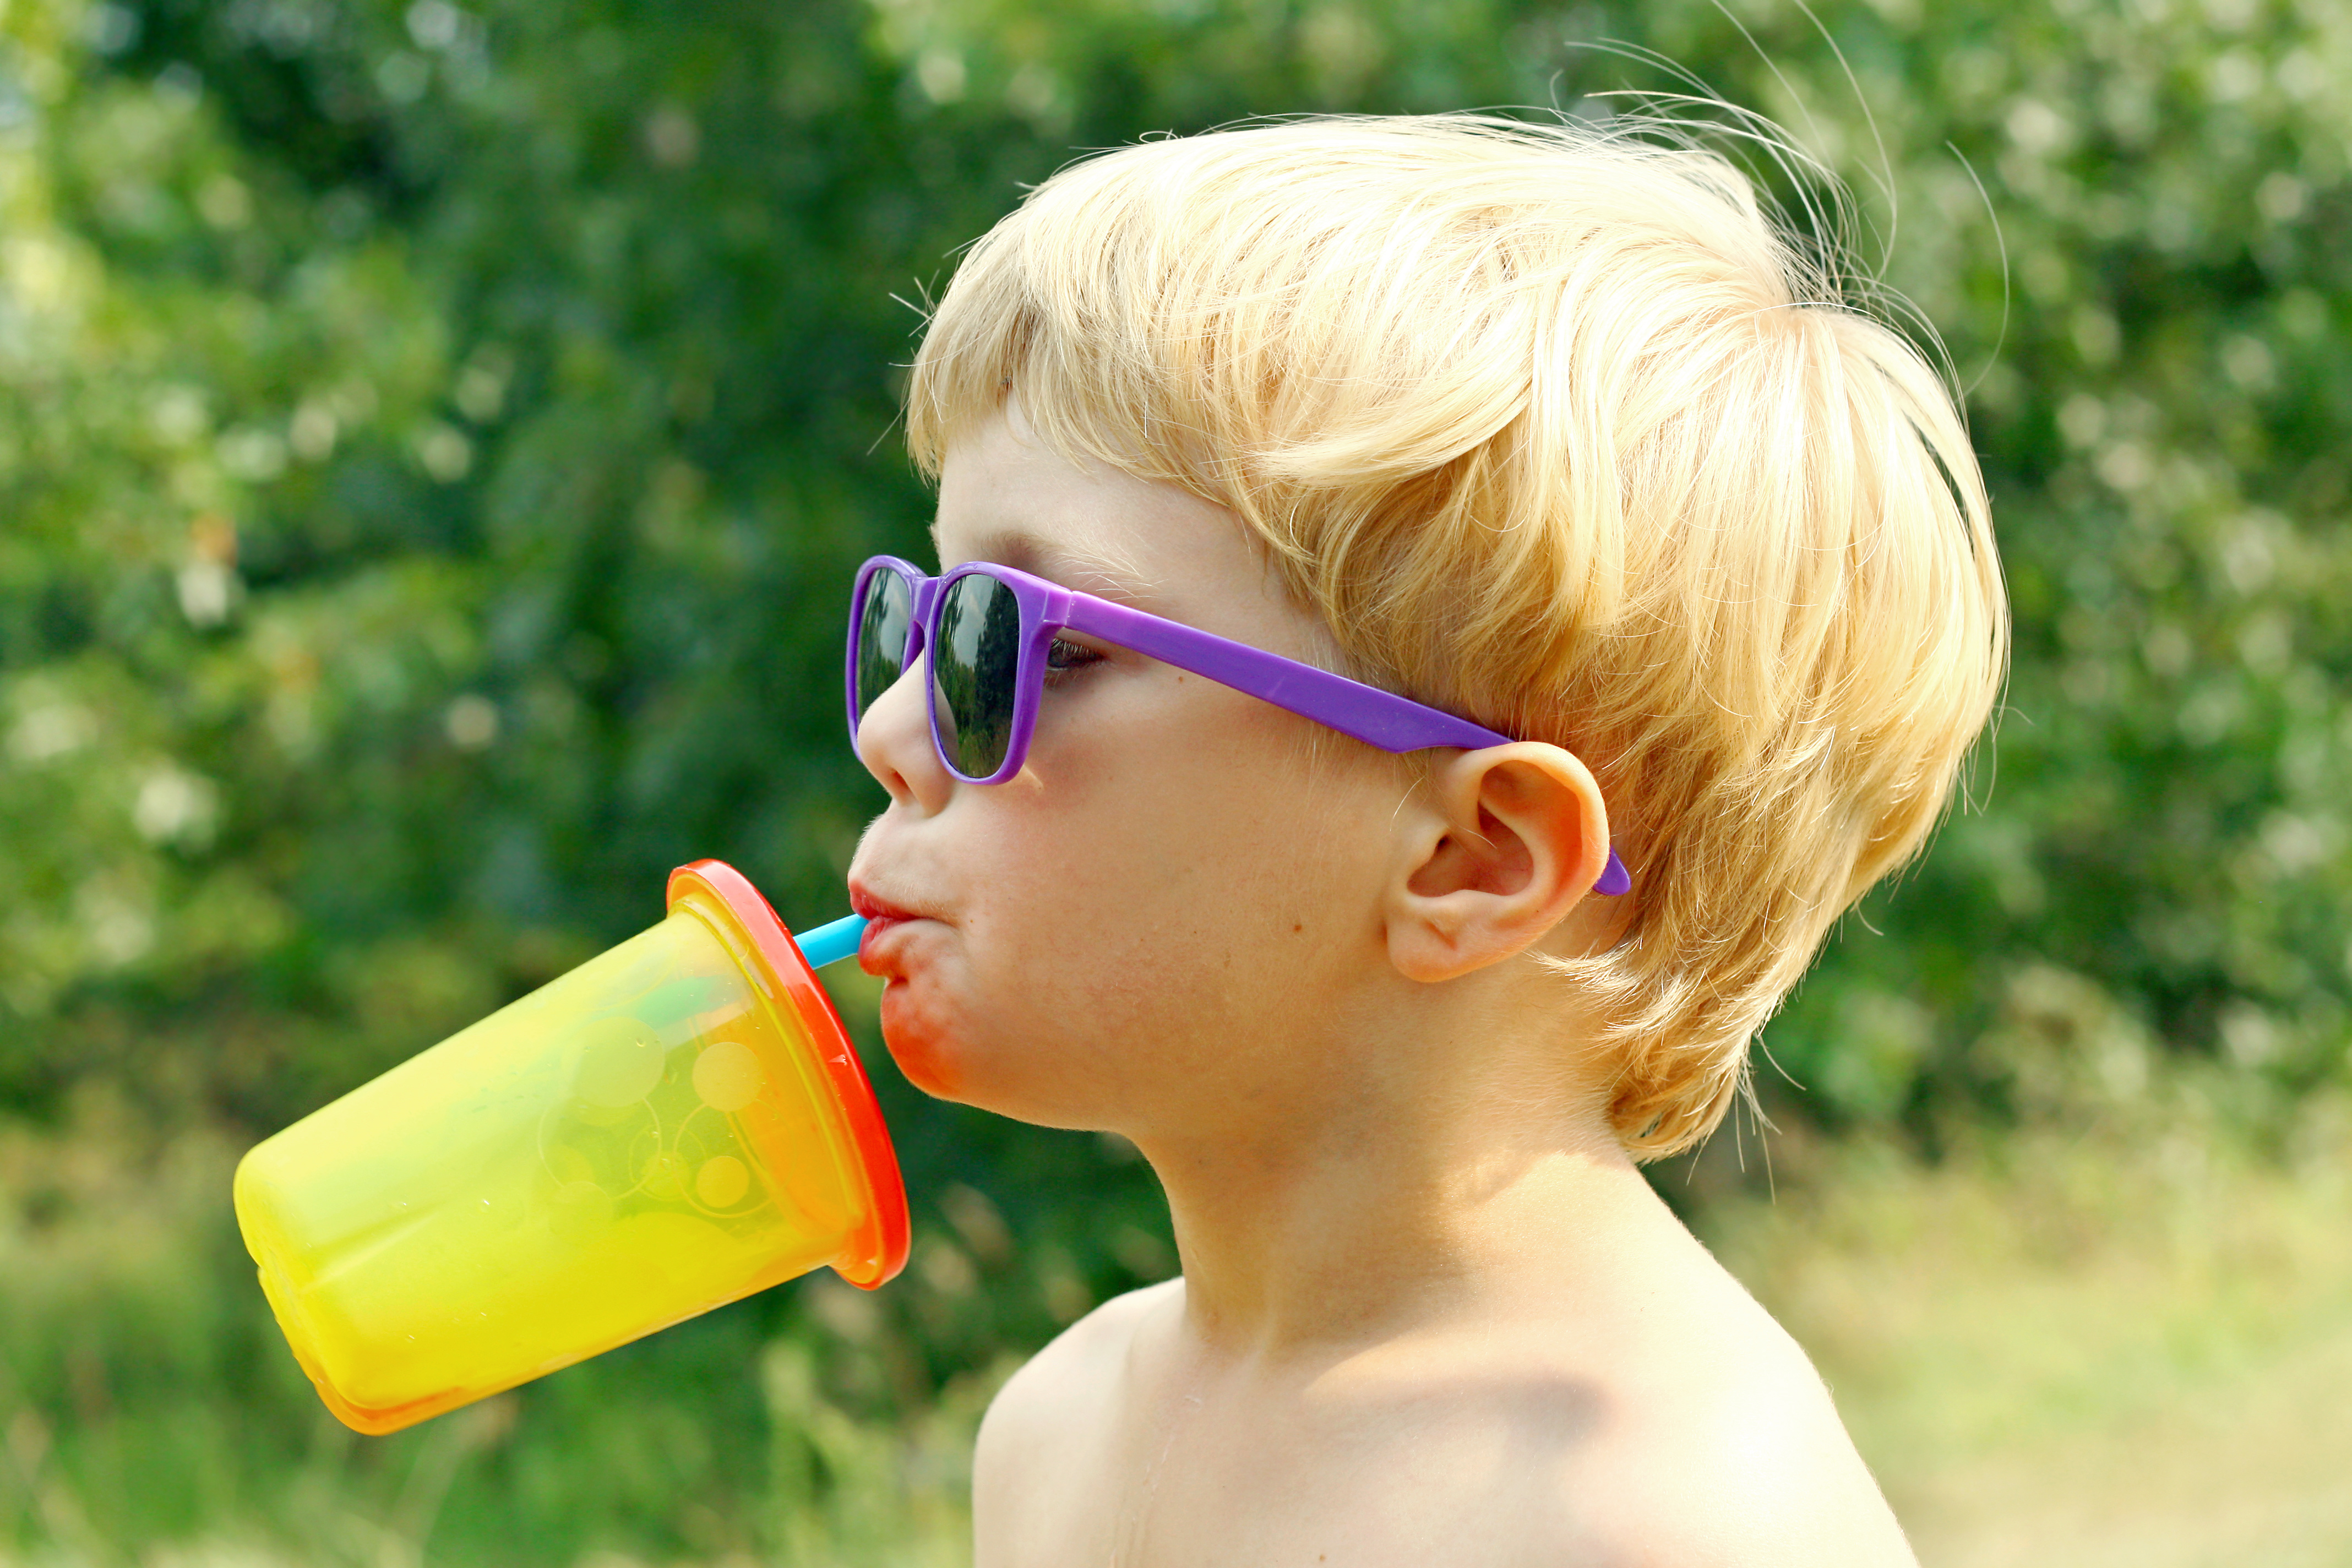 Sippy Cups: 3 Reasons to Skip Them and What to Offer Instead